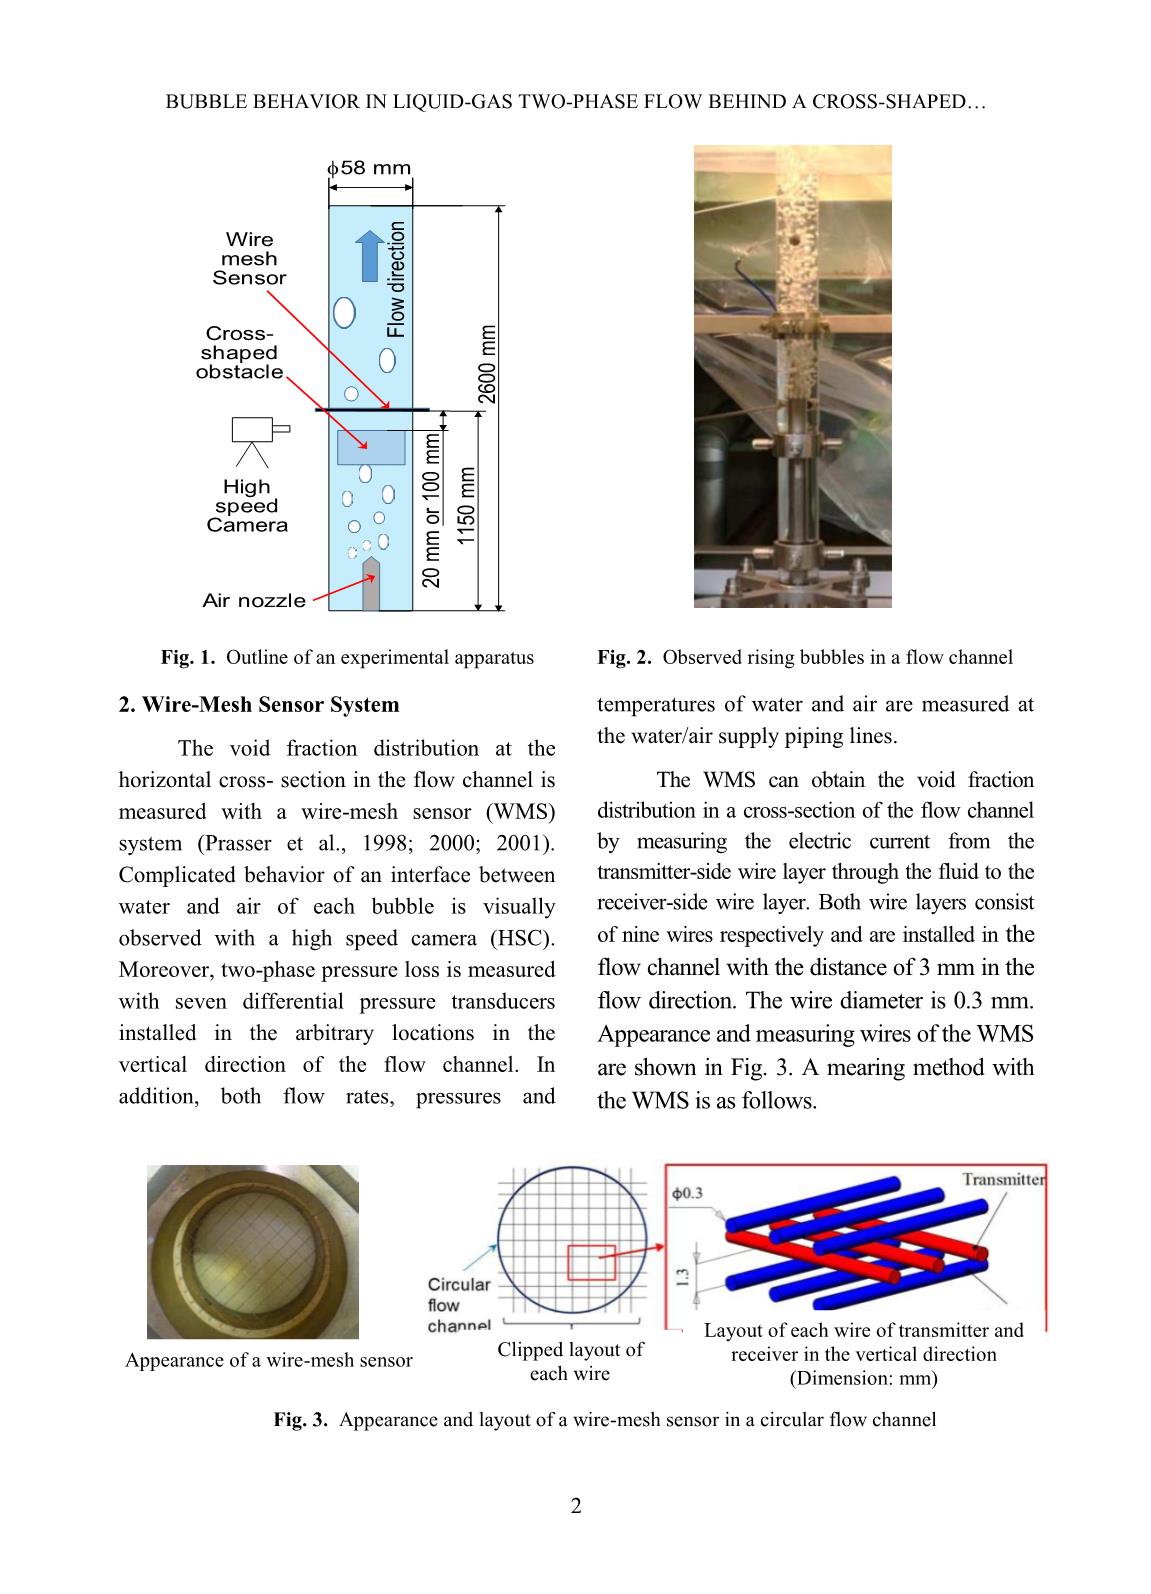 Nuclear Science and Technology - Volume 9, Number 4, December 2019 trang 5